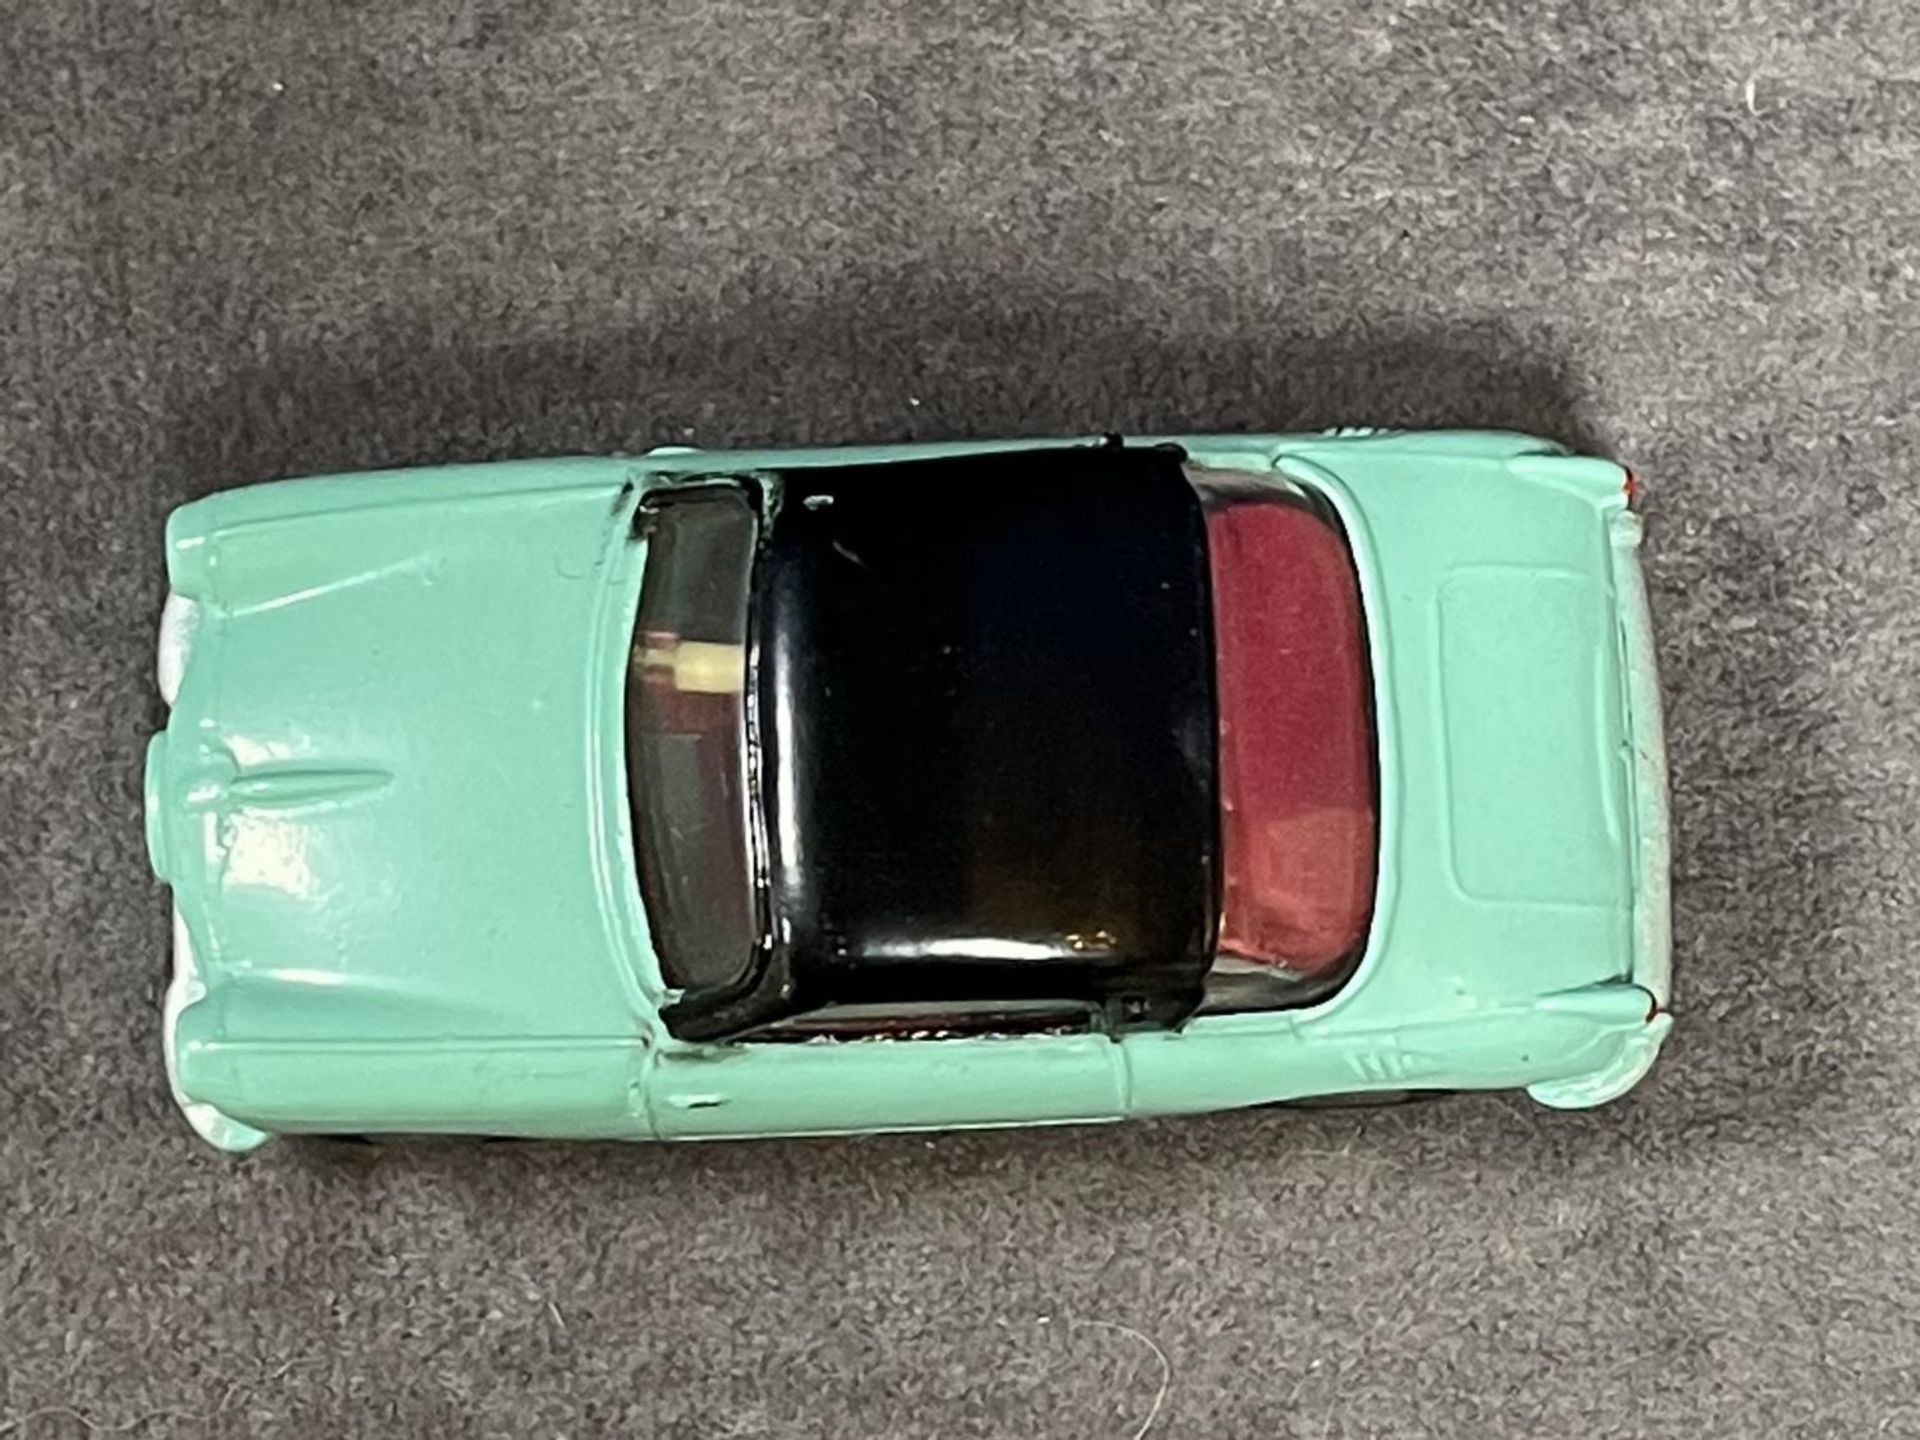 Spot-On #119 Meadows Frisky Sport Various - 1/42 Scale Aqua With Black Roof Mint Model In An - Image 5 of 5